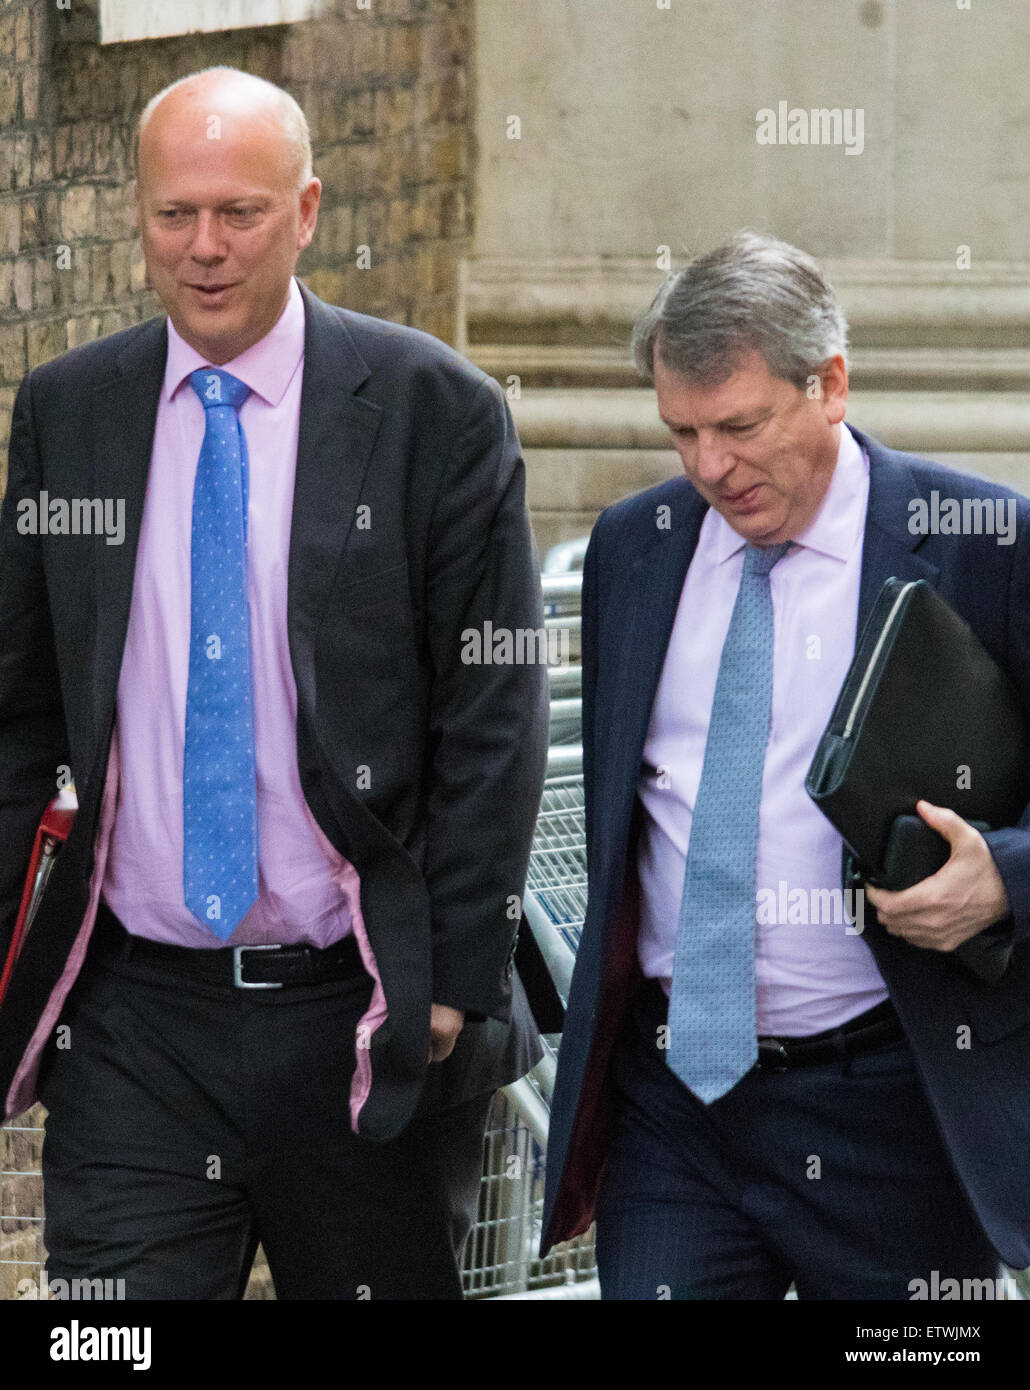 Downing Street, London, UK. 16th June, 2015. Leader of the House of Commons Chris Grayling arrives at 10 Downing Street for the weekly cabinet meeting, accompanied by political strategist Lynton Crosby. Credit:  Paul Davey/Alamy Live News Stock Photo